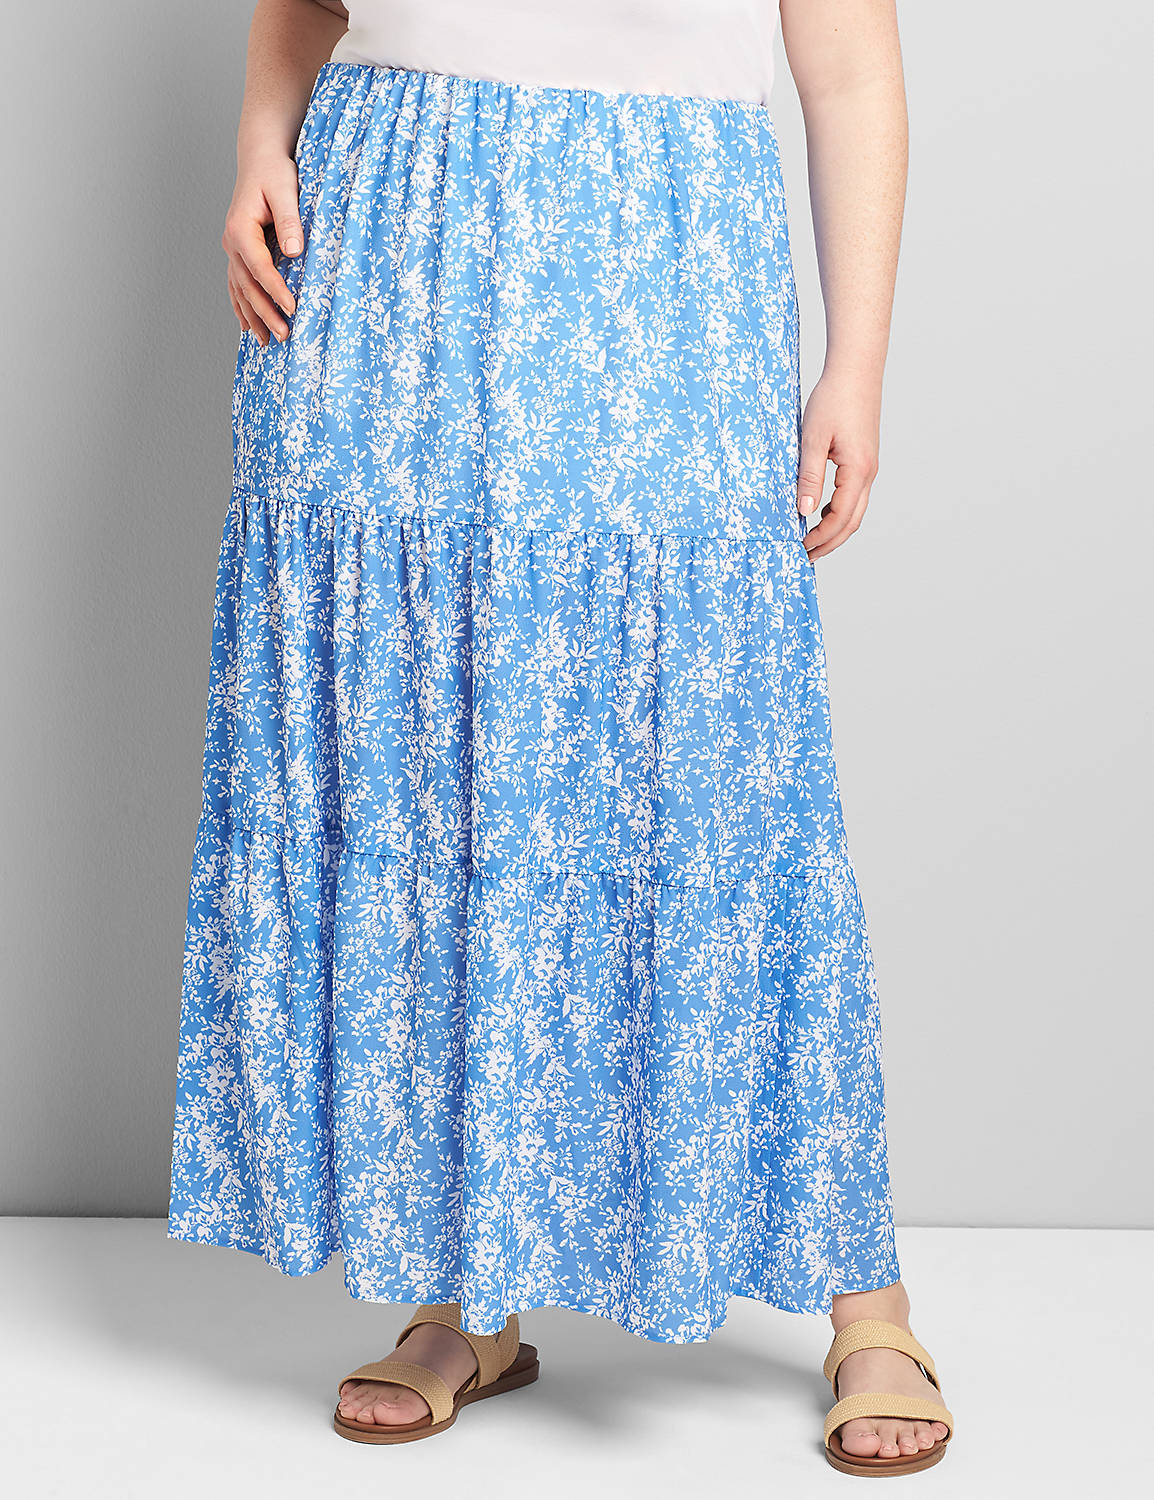 TIERED MAXI SKIRT 1119996:LBSU21319_MountainLake_colorway1:14/16 Product Image 3